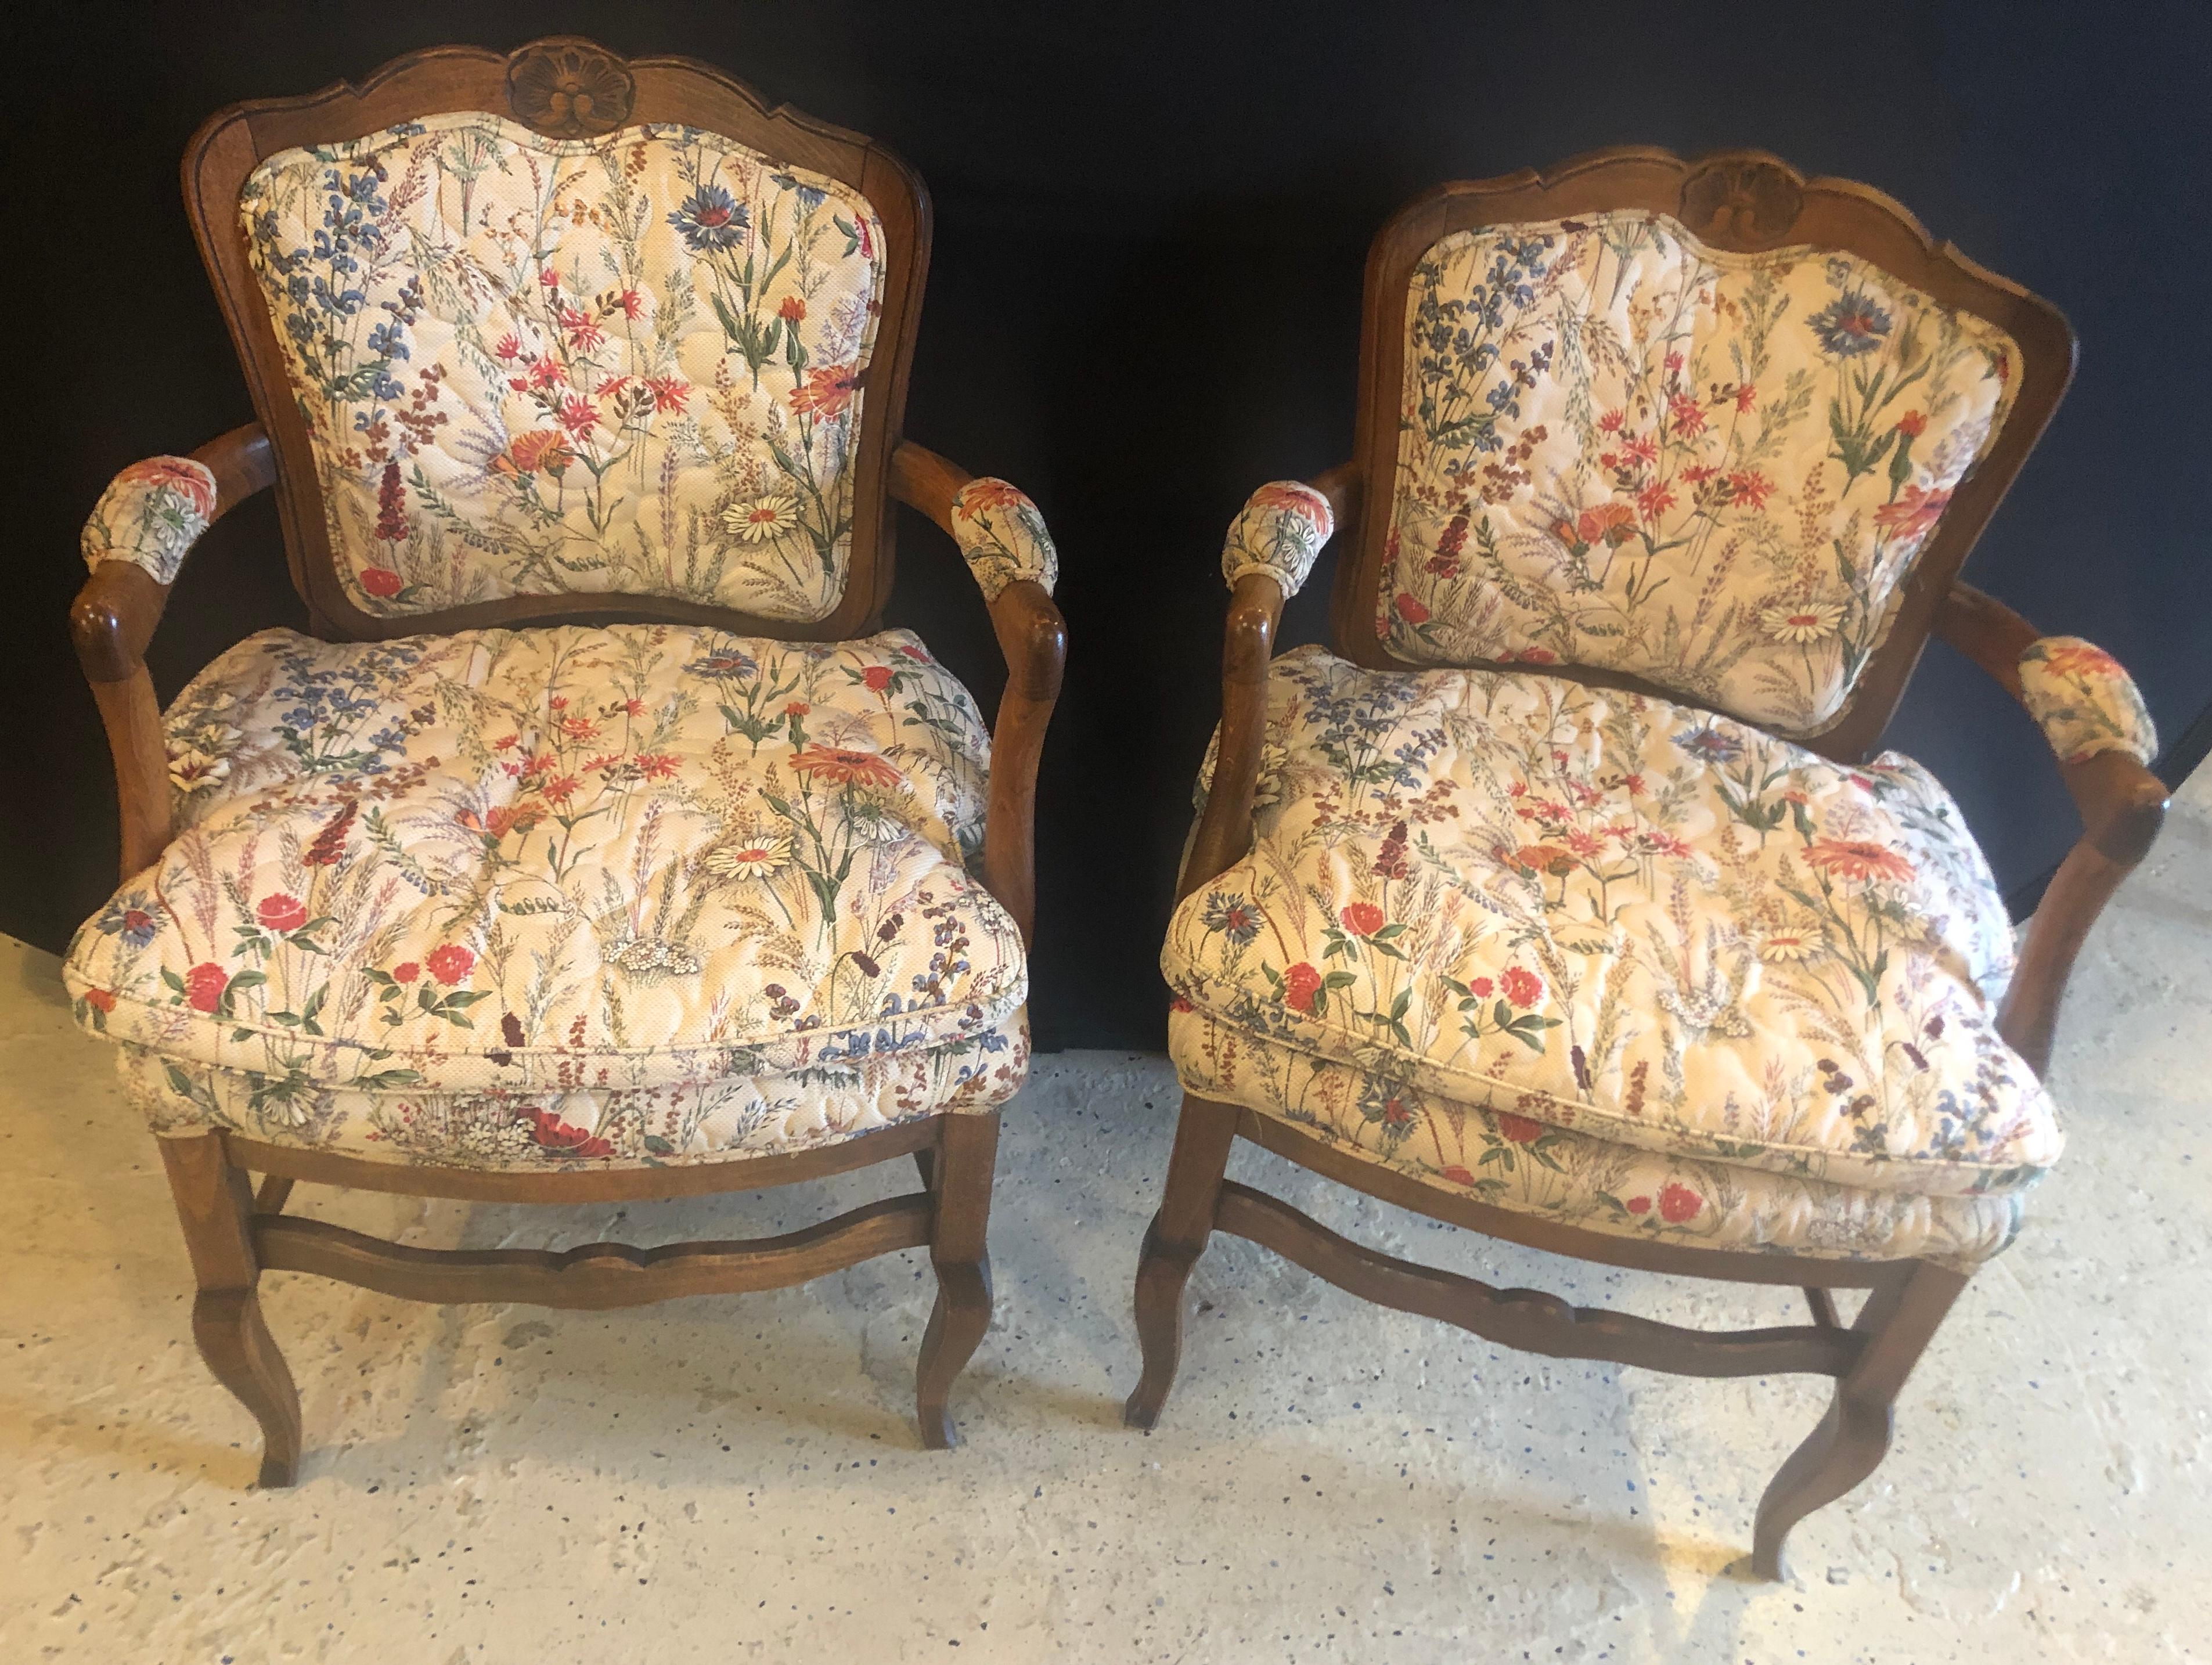 French Provincial Country French Boudoir Fauteuil Louis XV Chairs in Quilted like Upholstery, pair